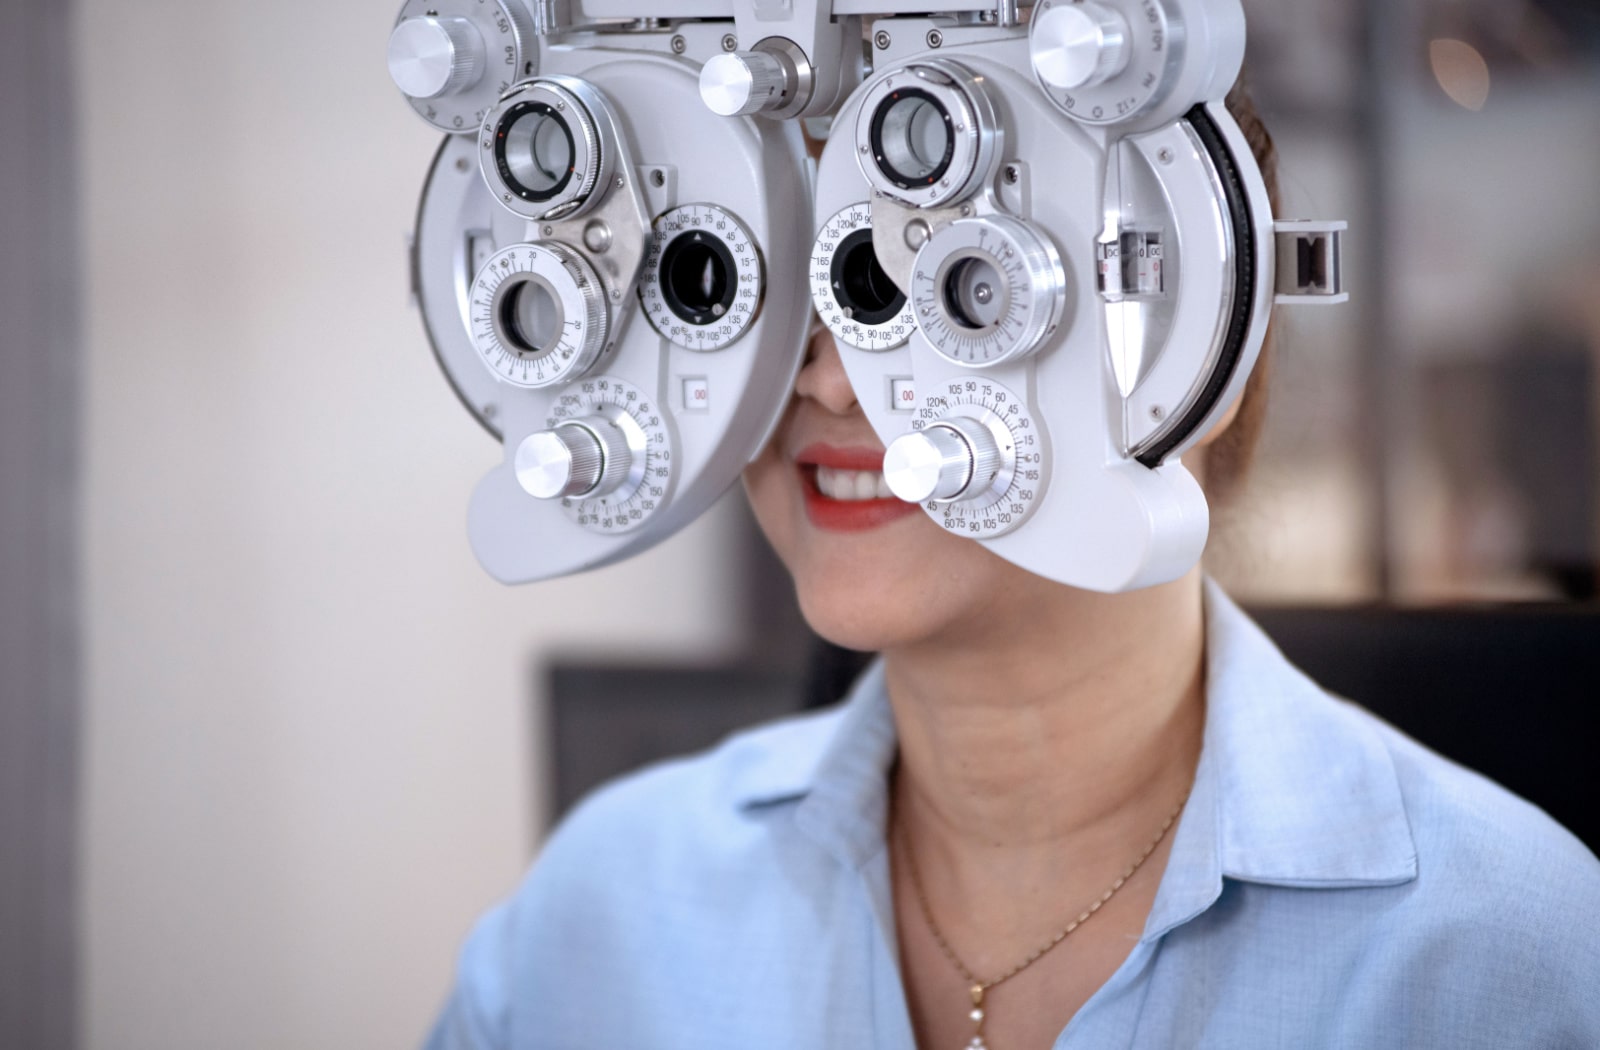 A woman gets her eyes examined by an optometrist